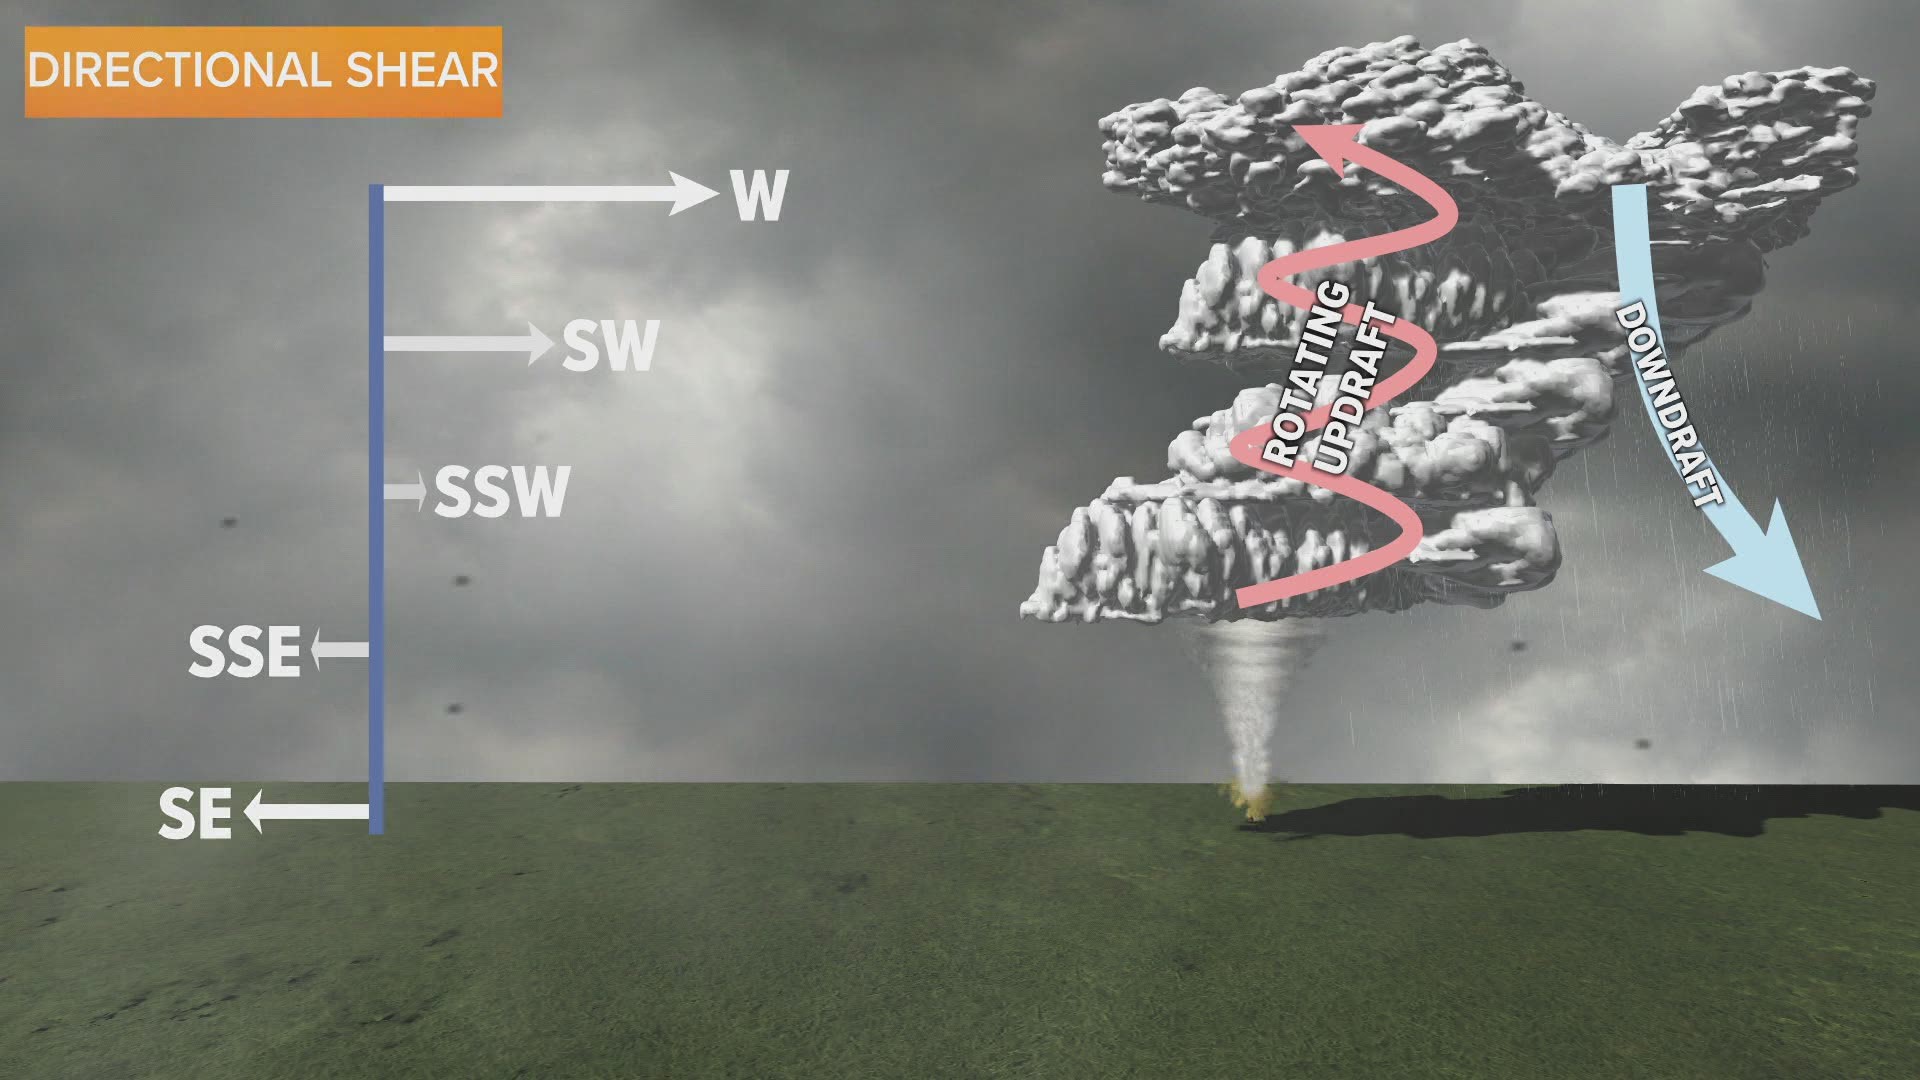 Several factors need to be considered when forecasting severe weather